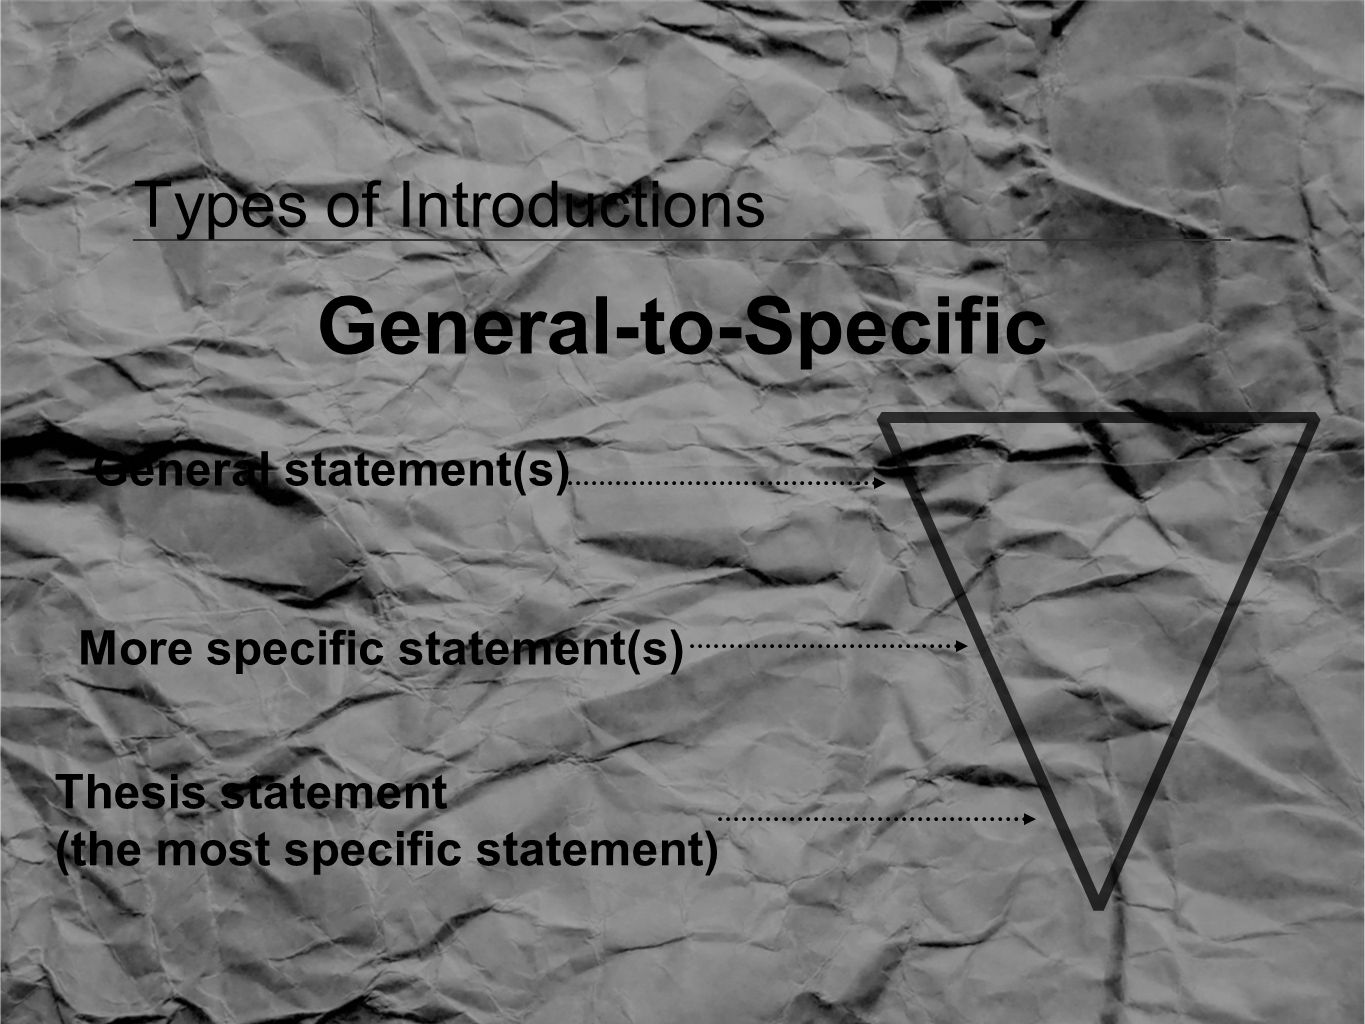 Types of Introductions General-to-Specific General statement(s) More specific statement(s) Thesis statement (the most specific statement)